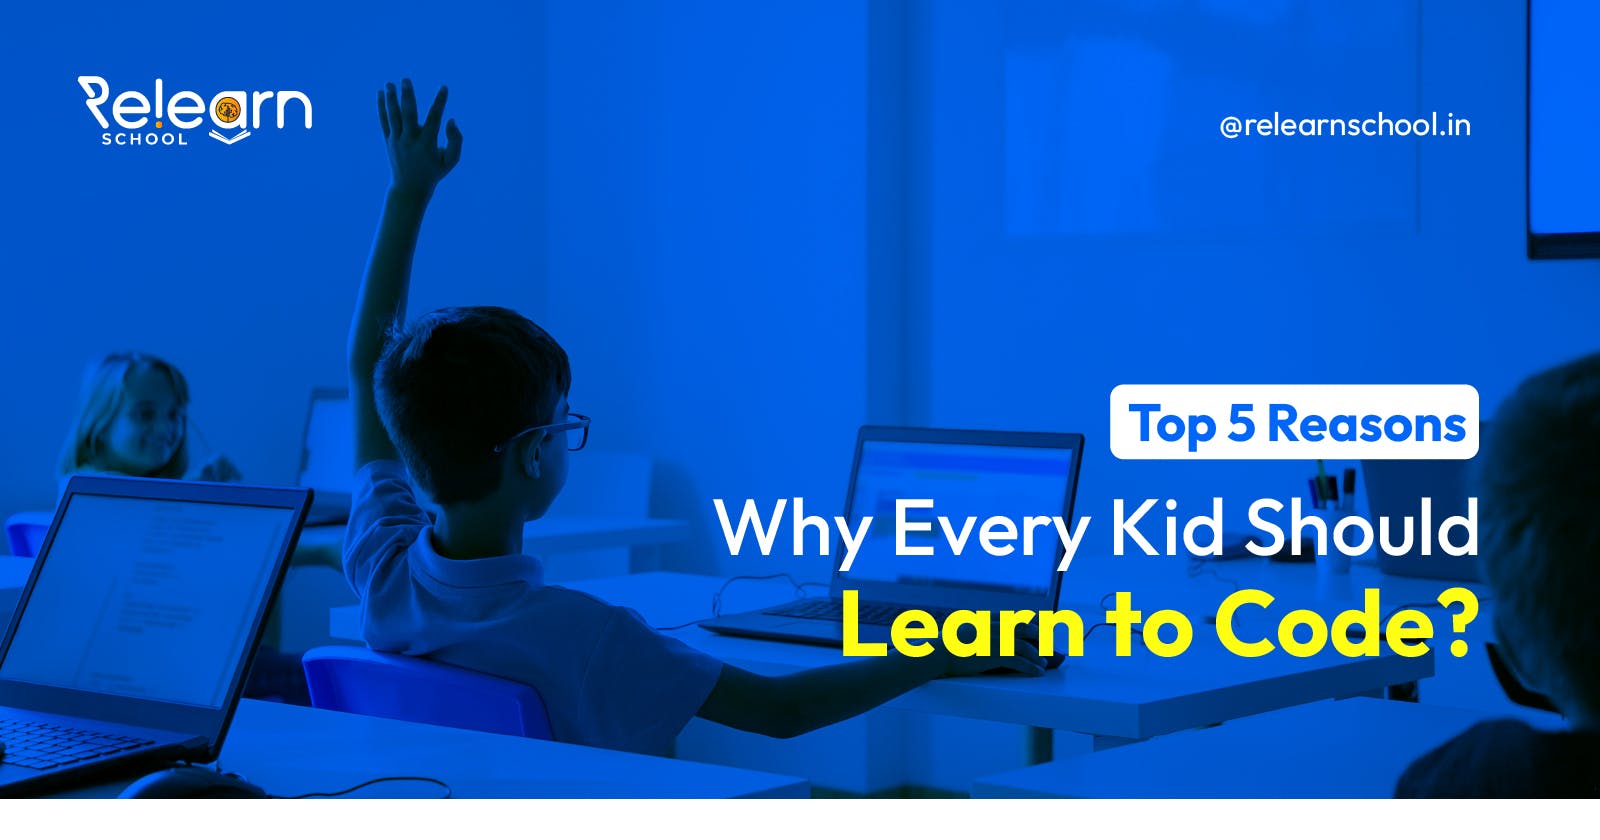 Top 5 Reasons Why Every Kid Should Learn to Code?